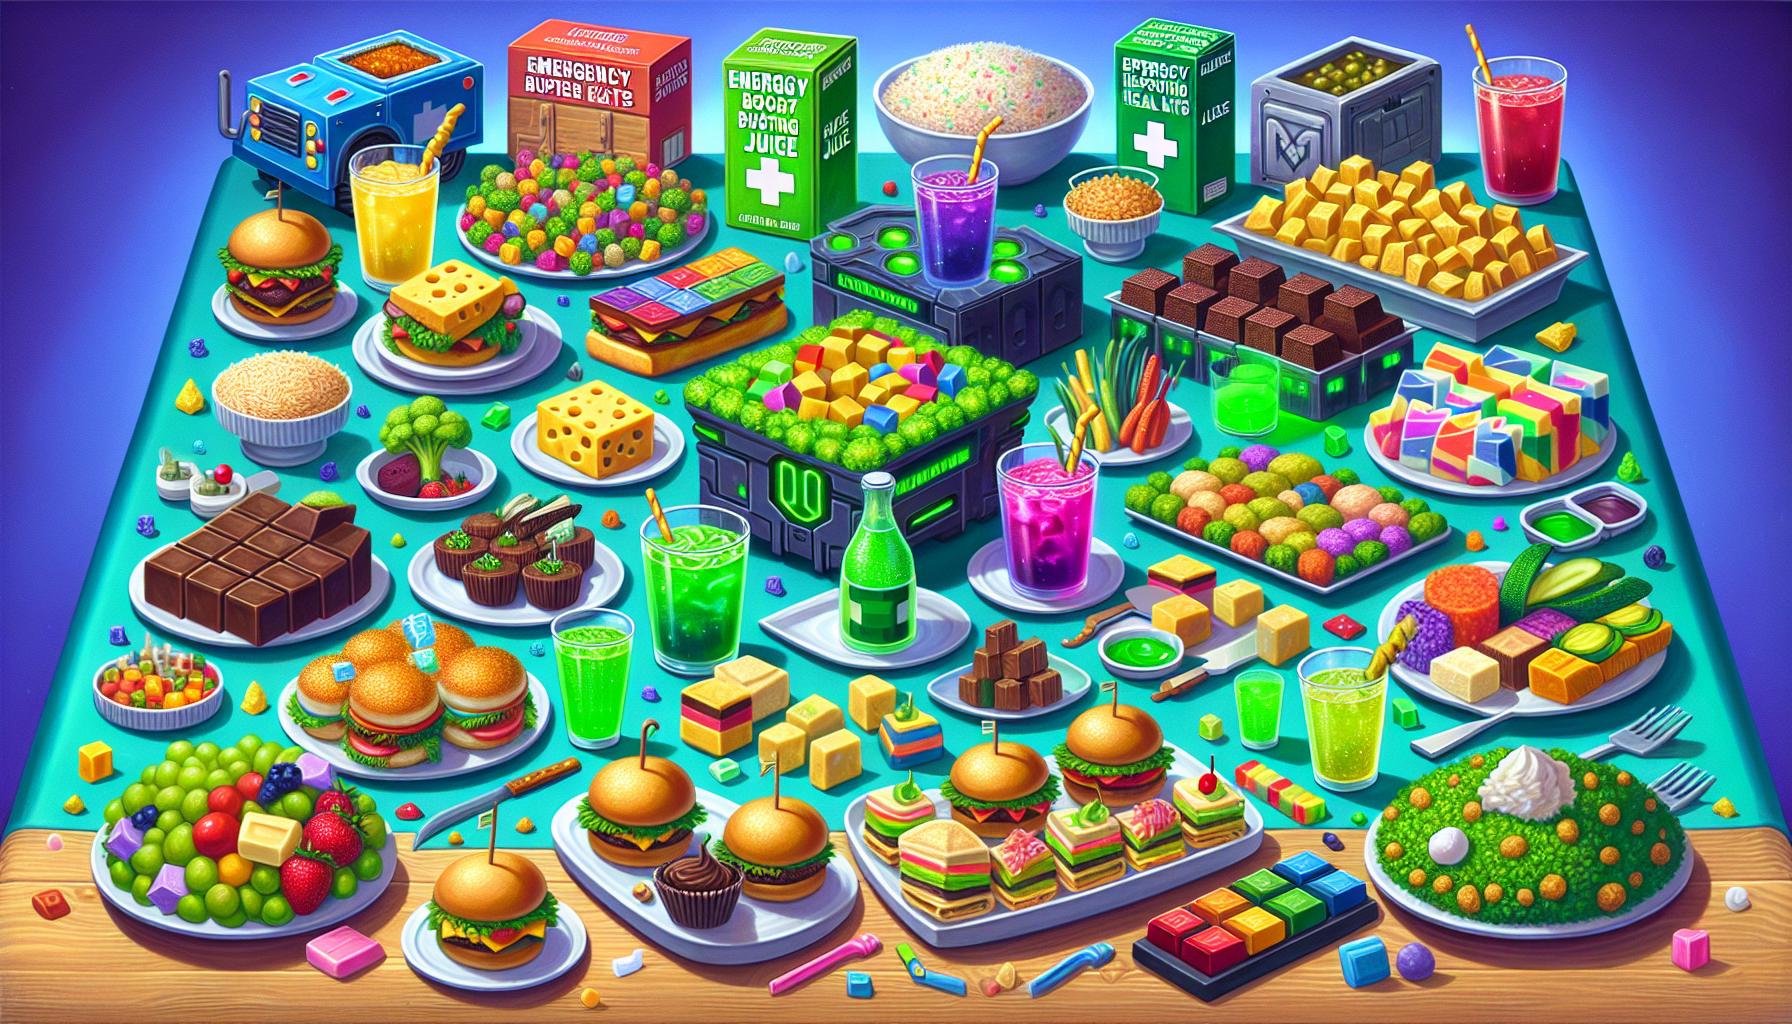 Top Fortnite Party Food Ideas: Snacks & Beverages for Gamers